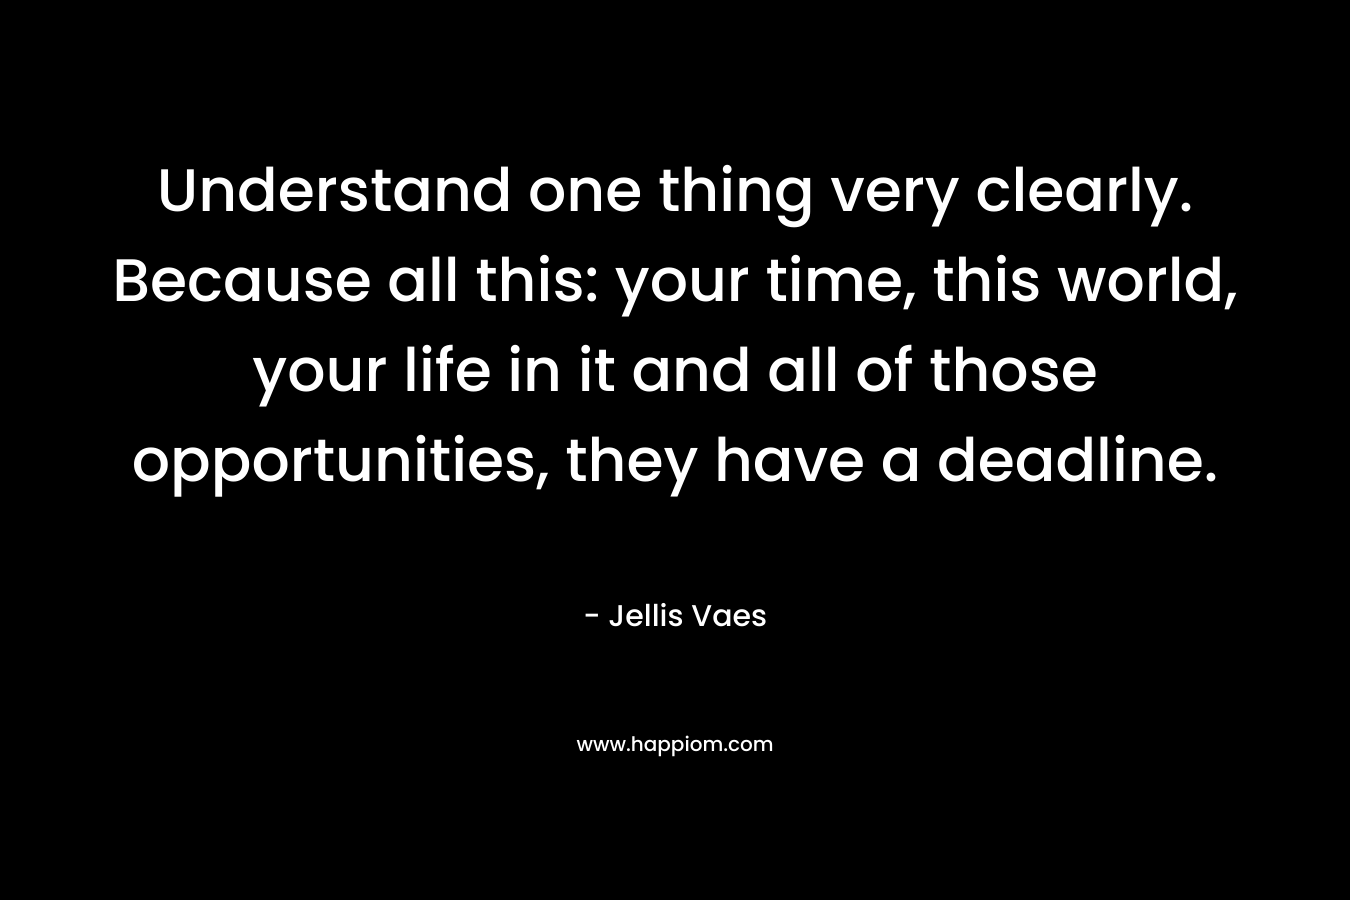 Understand one thing very clearly. Because all this: your time, this world, your life in it and all of those opportunities, they have a deadline. – Jellis Vaes